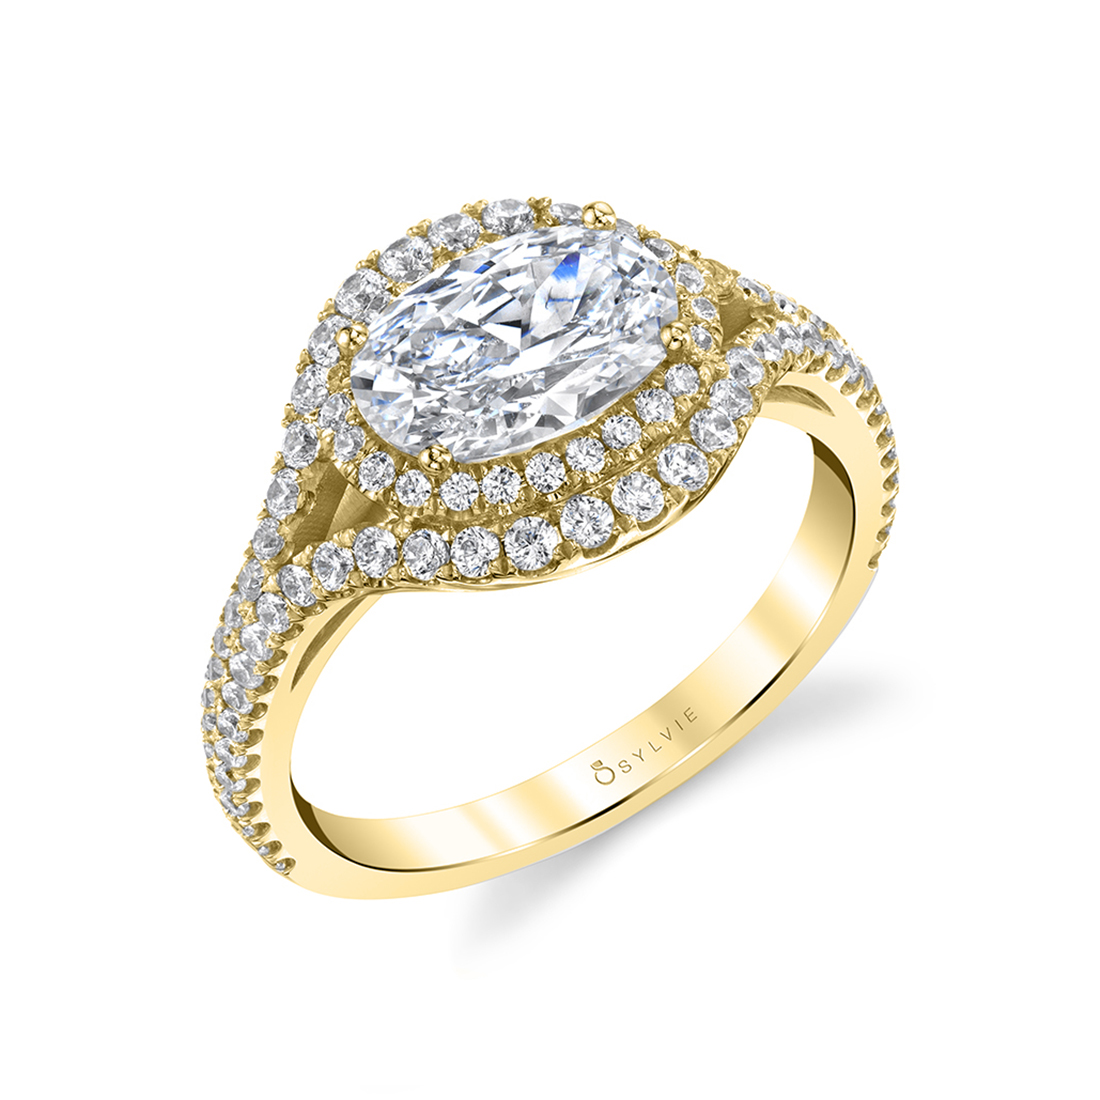 Oval Diamond Ring with Halo in Yellow Gold - Eleanora